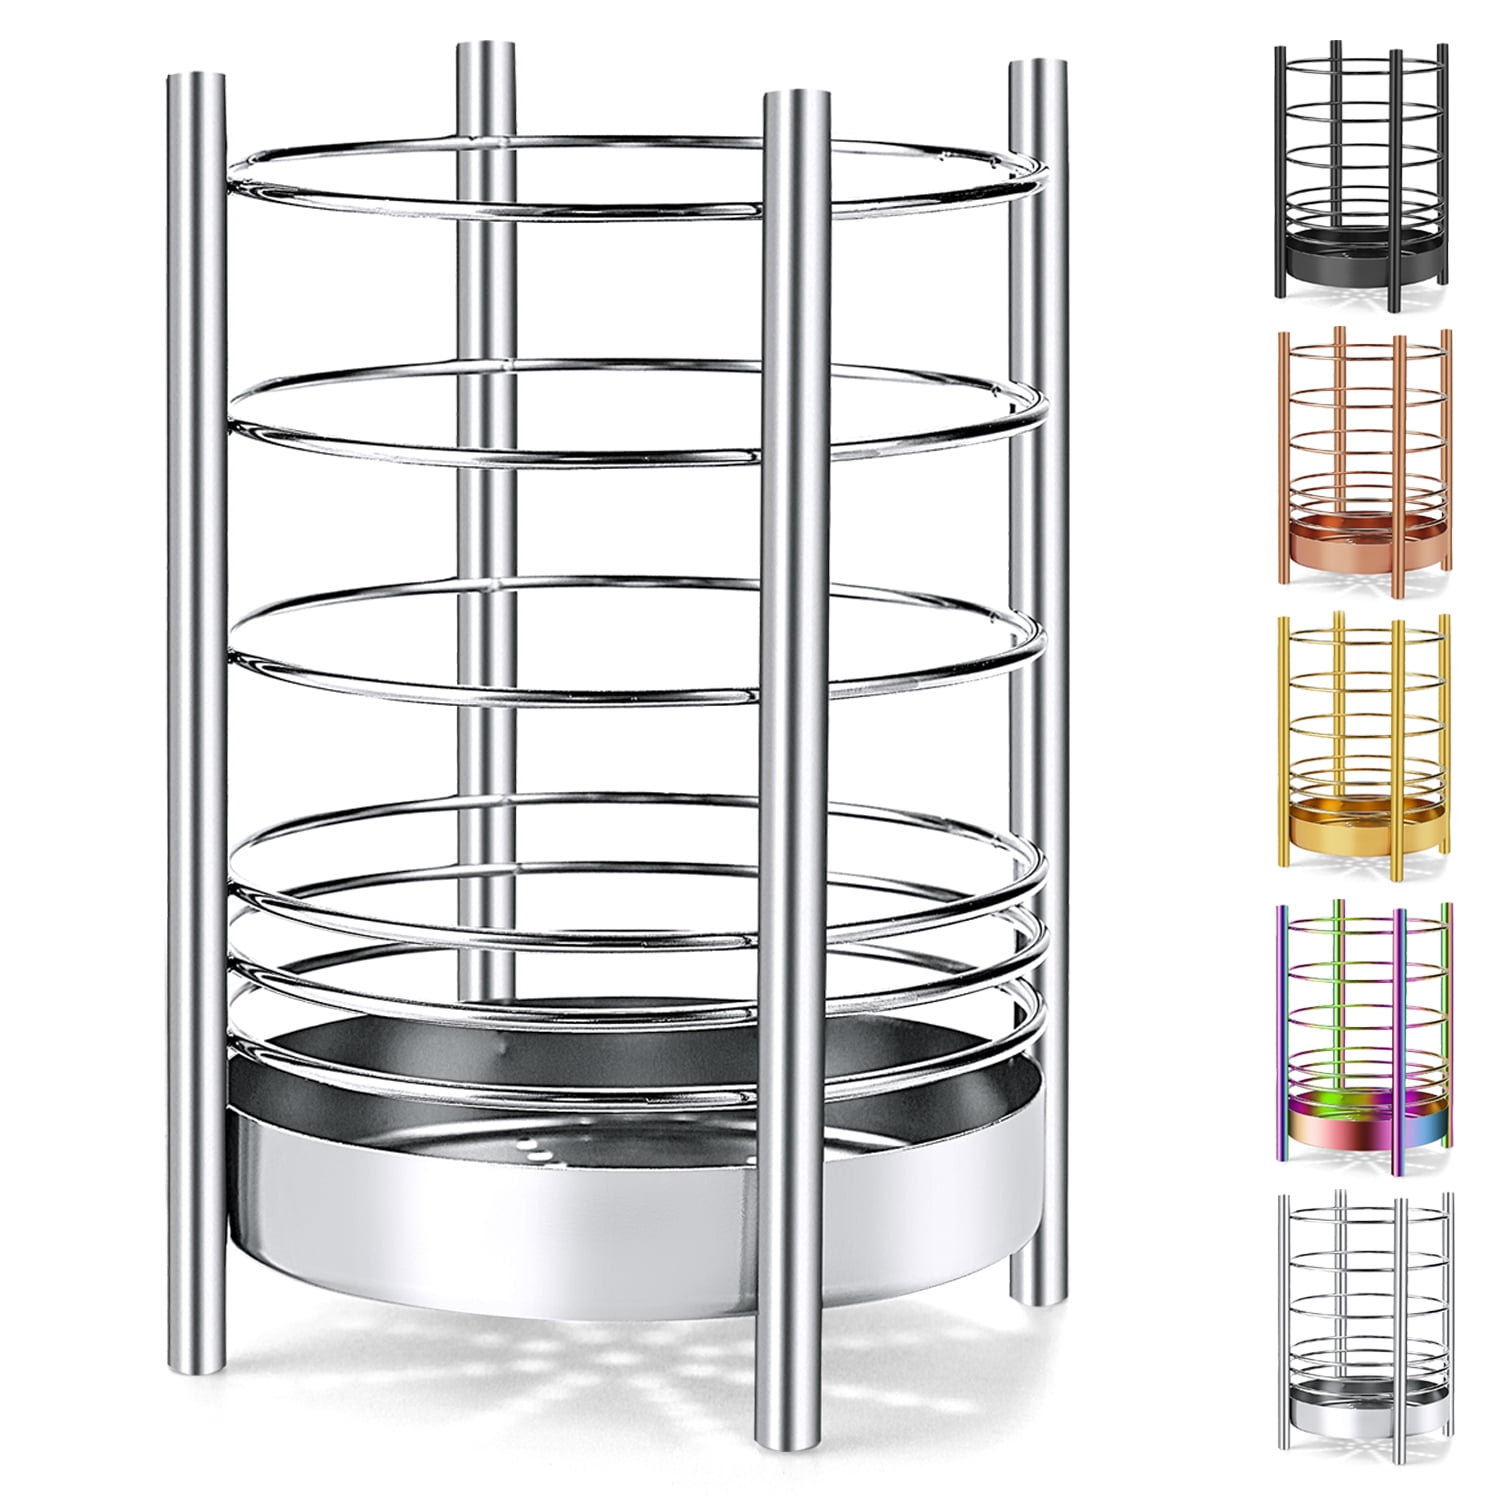 Utensil Holder Stainless Steel,Cooking Utensil Holder 5 x 5.3 Inches,  Kitchen Utensil Drying Cylinder with Drain Holes，Cookware Cutlery Holder  for